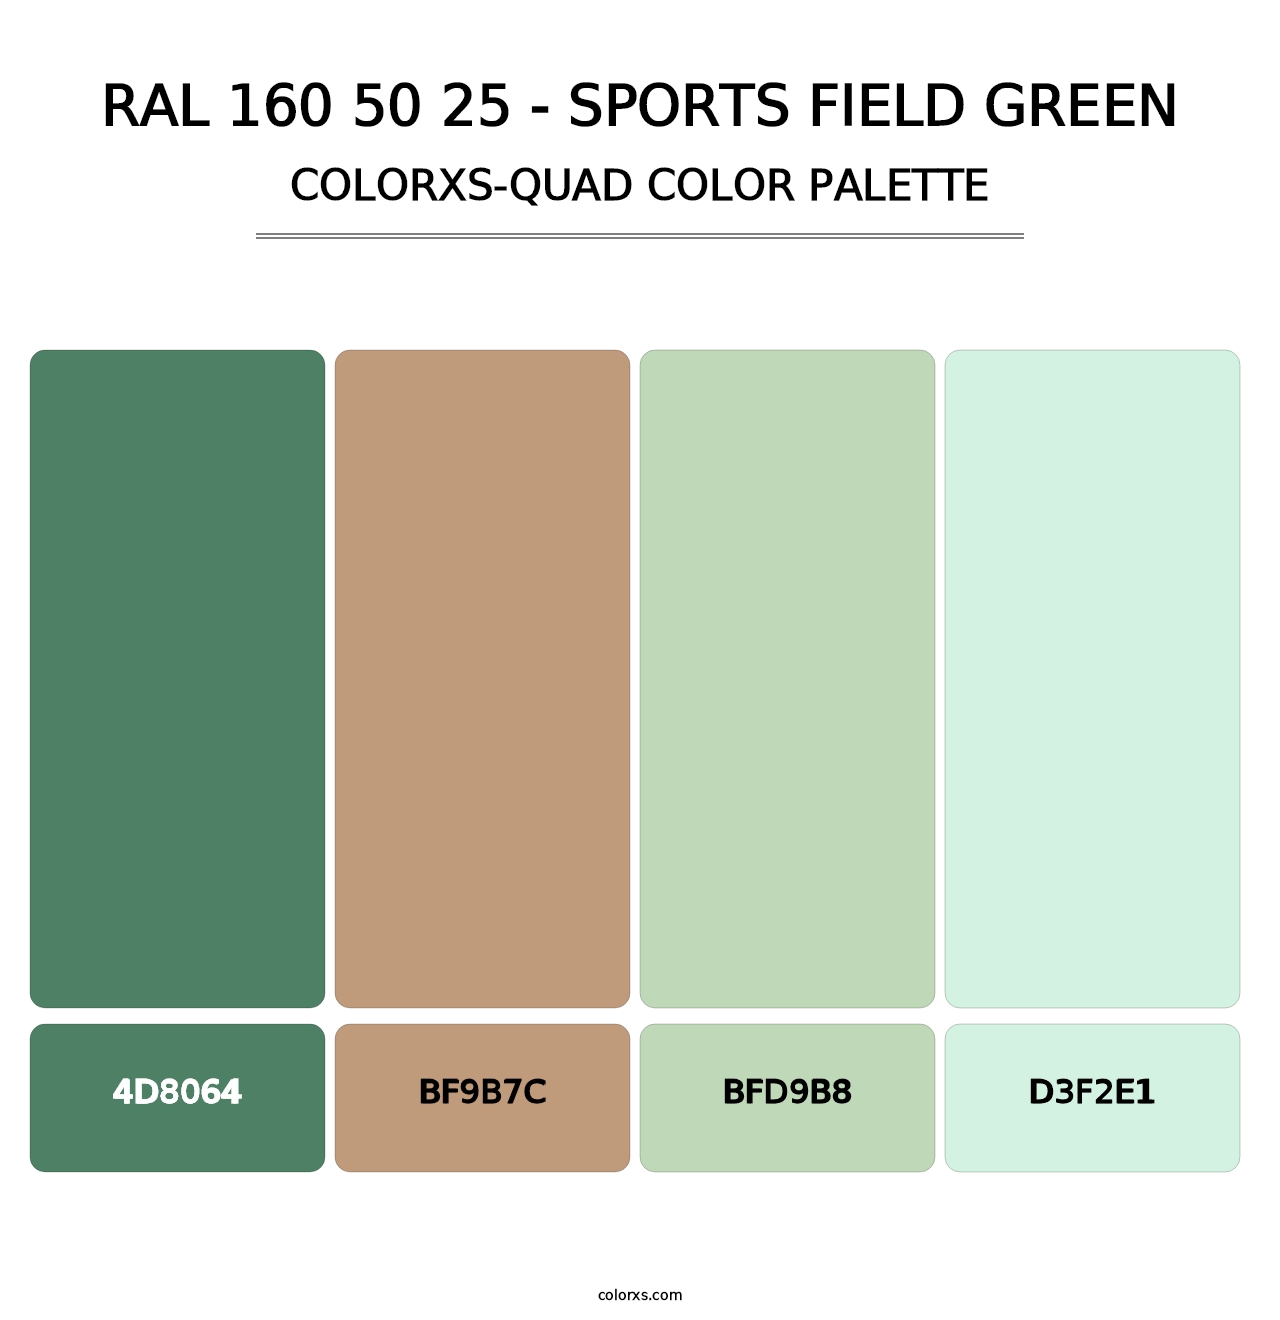 RAL 160 50 25 - Sports Field Green - Colorxs Quad Palette